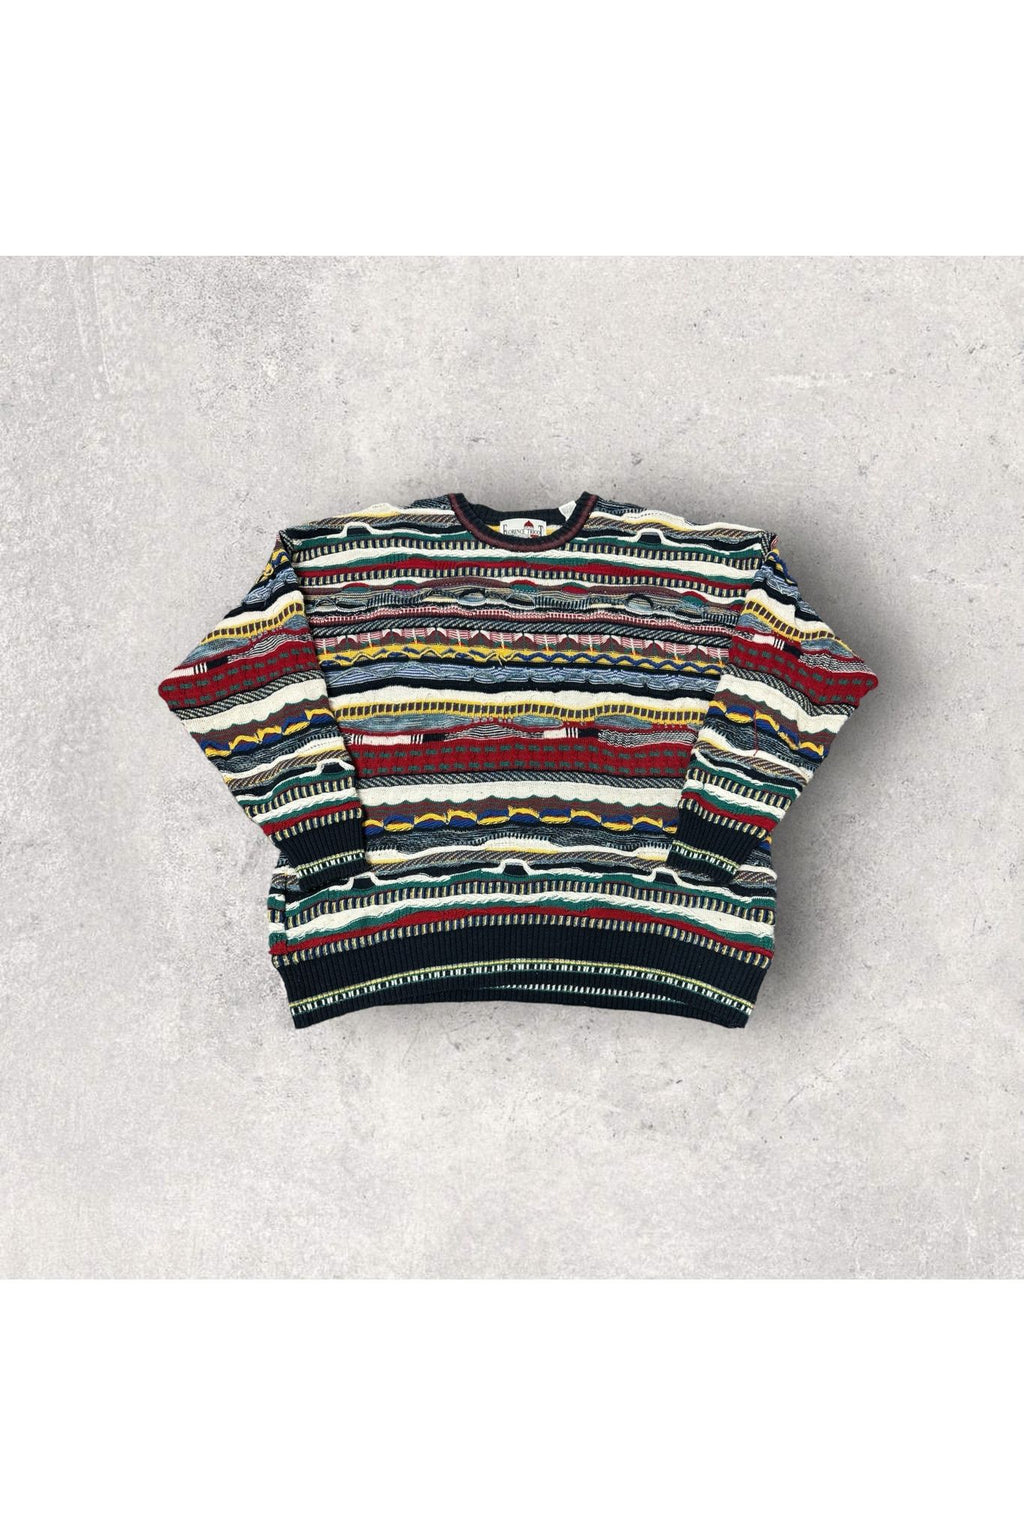 Vintage Florence Tricot Coogi Style Knit Sweater- XXL